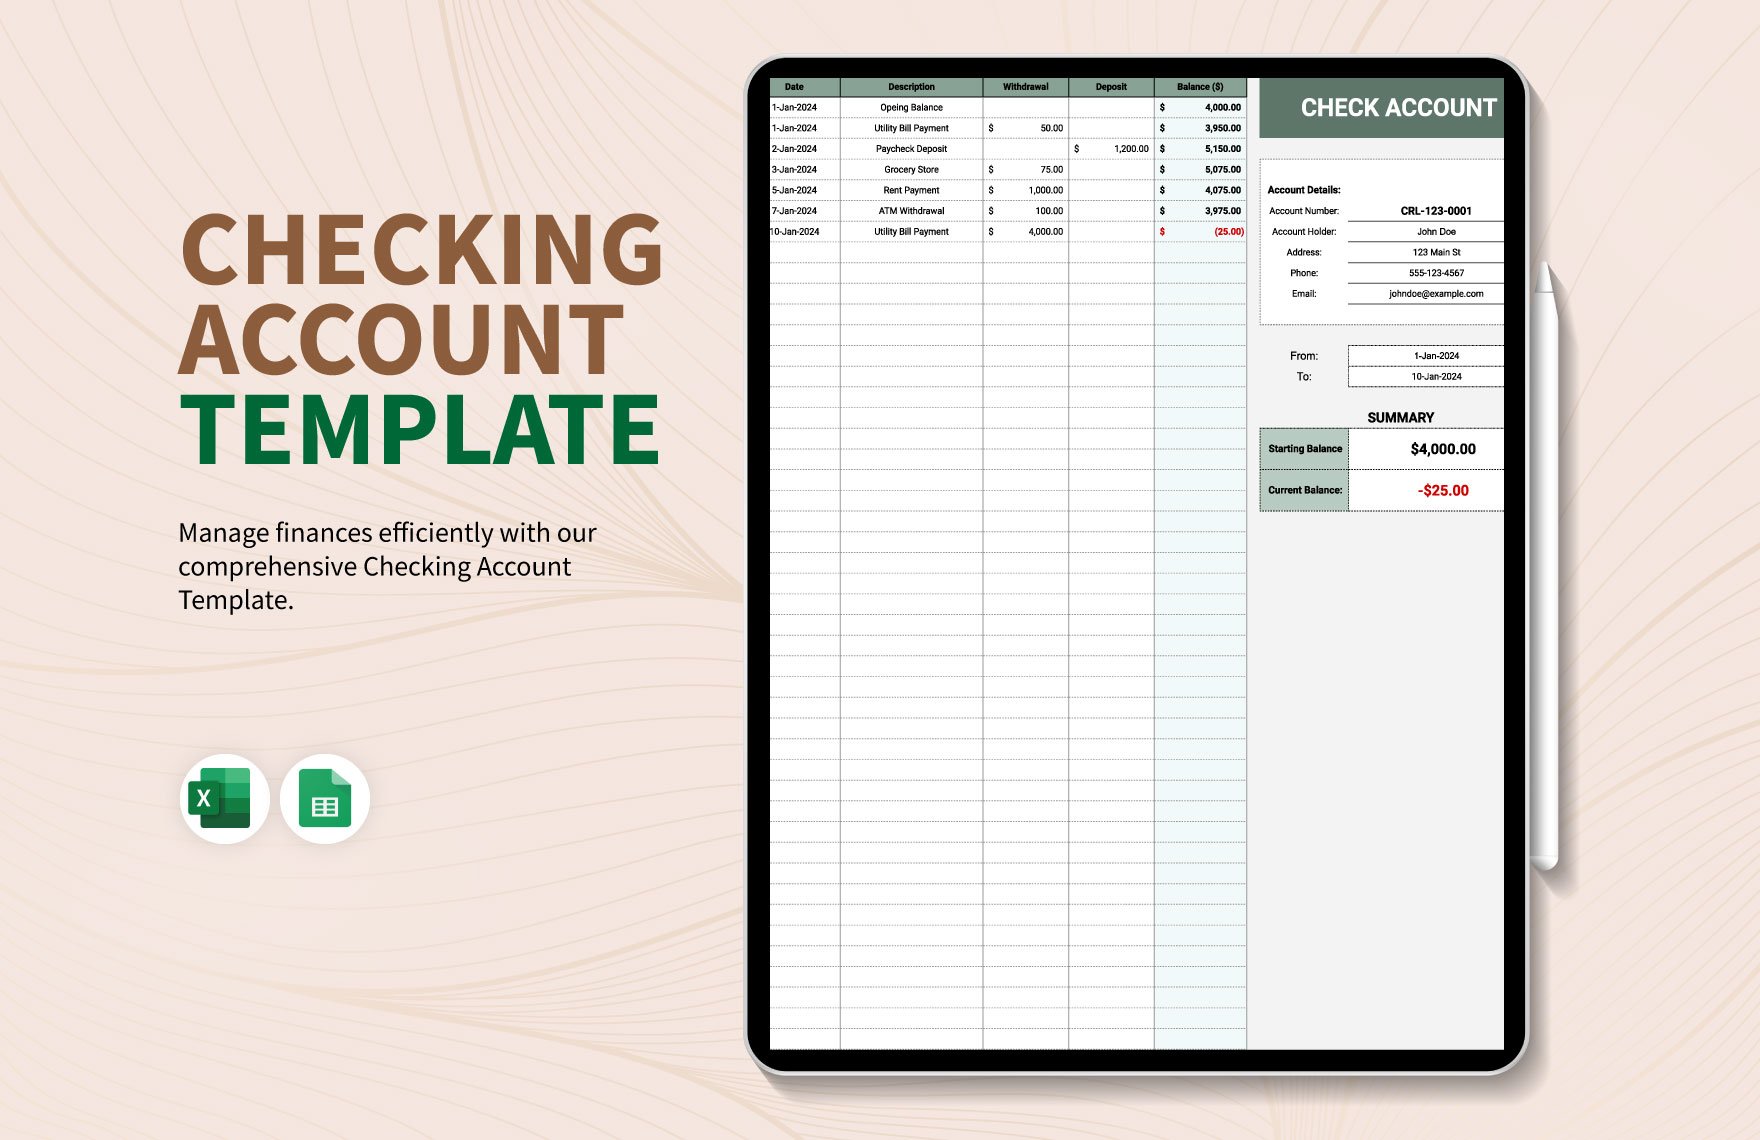 Checking Account Template in Excel, Google Sheets